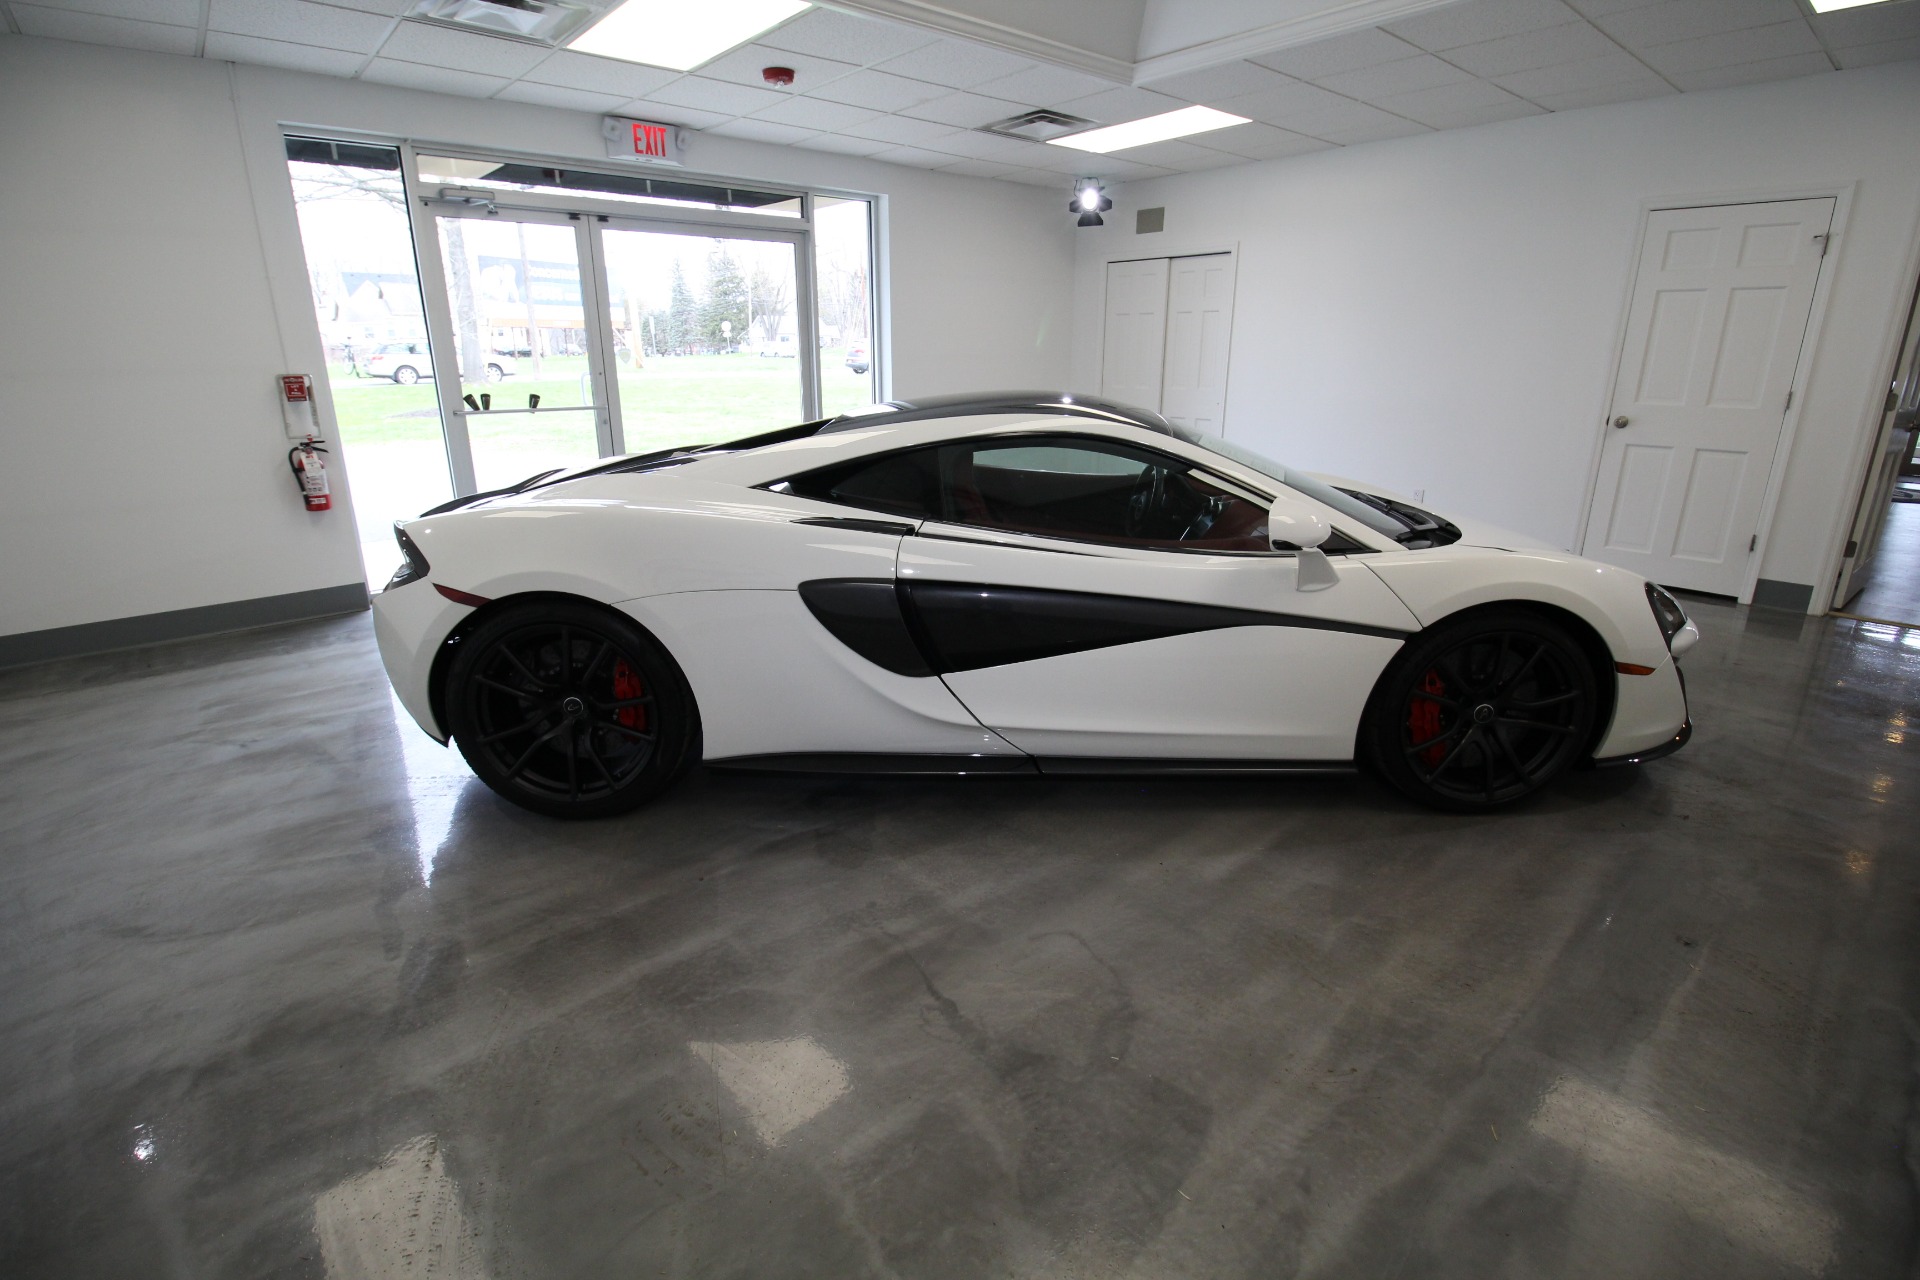 Used 2017 WHITE McLaren 570s LOADED RARE COLOR LOW MILES | Albany, NY